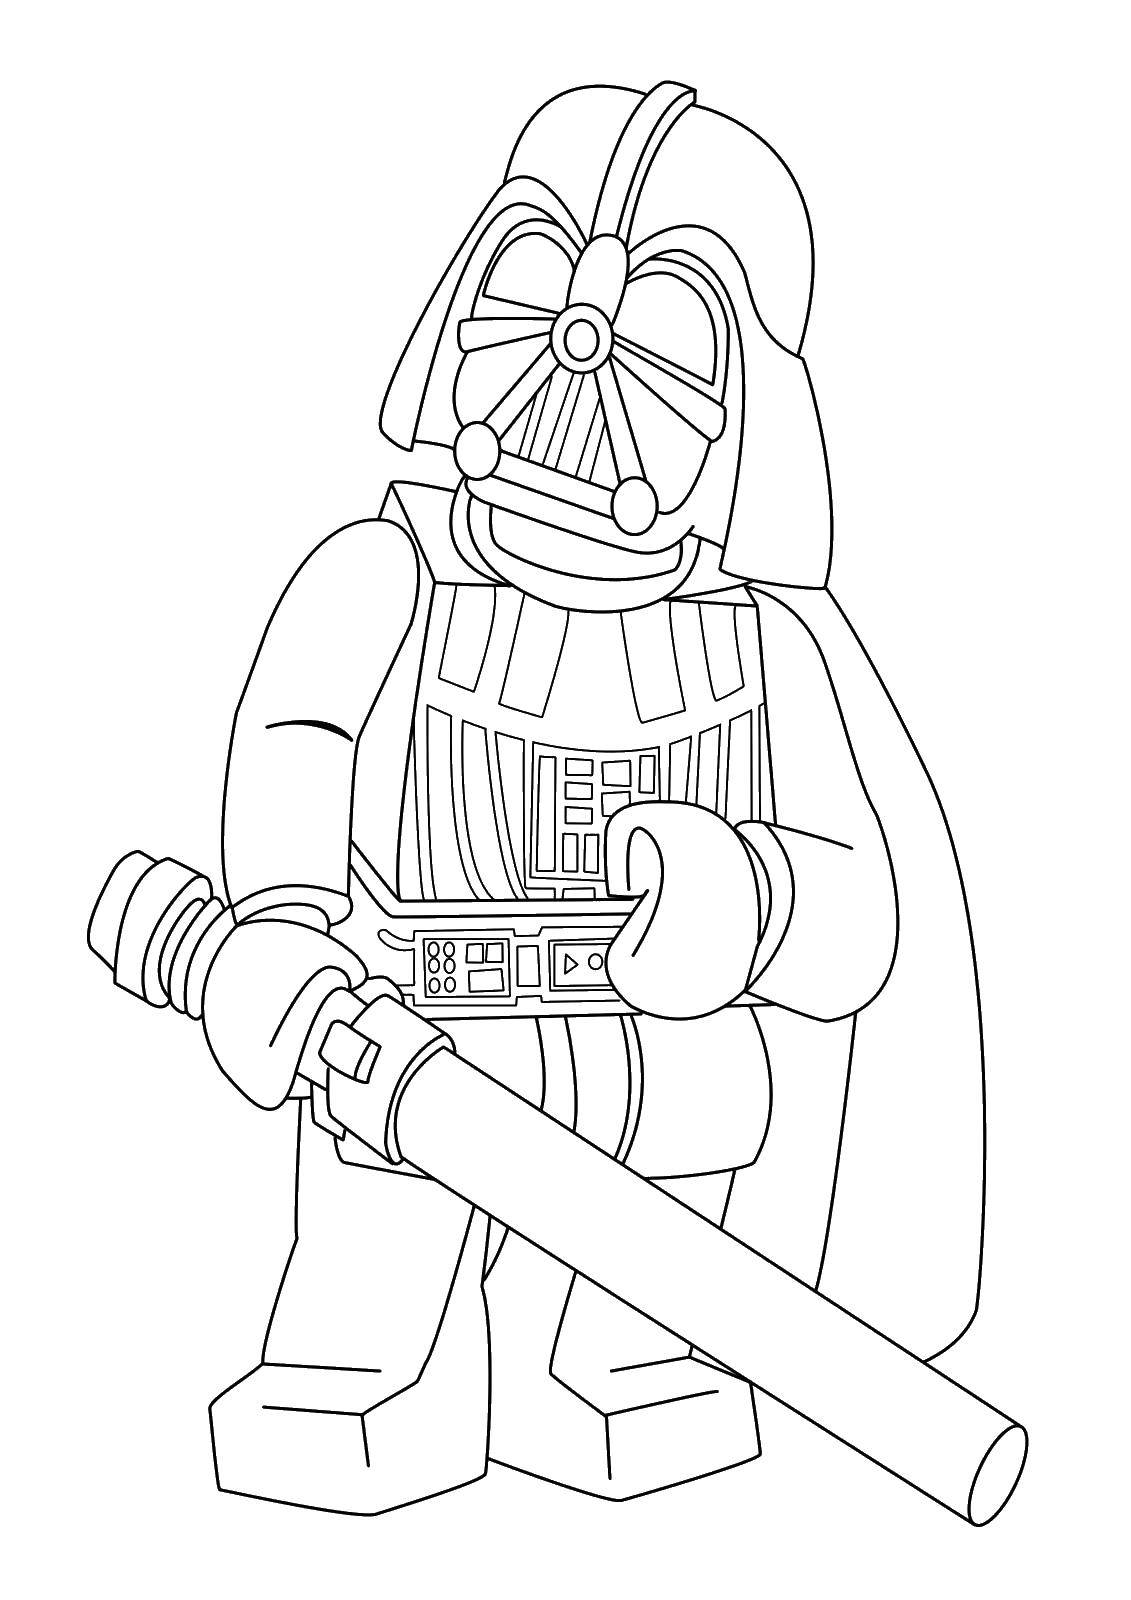 Coloring Darth Vader with a sword. Category LEGO. Tags:  Darth Vader, LEGO.